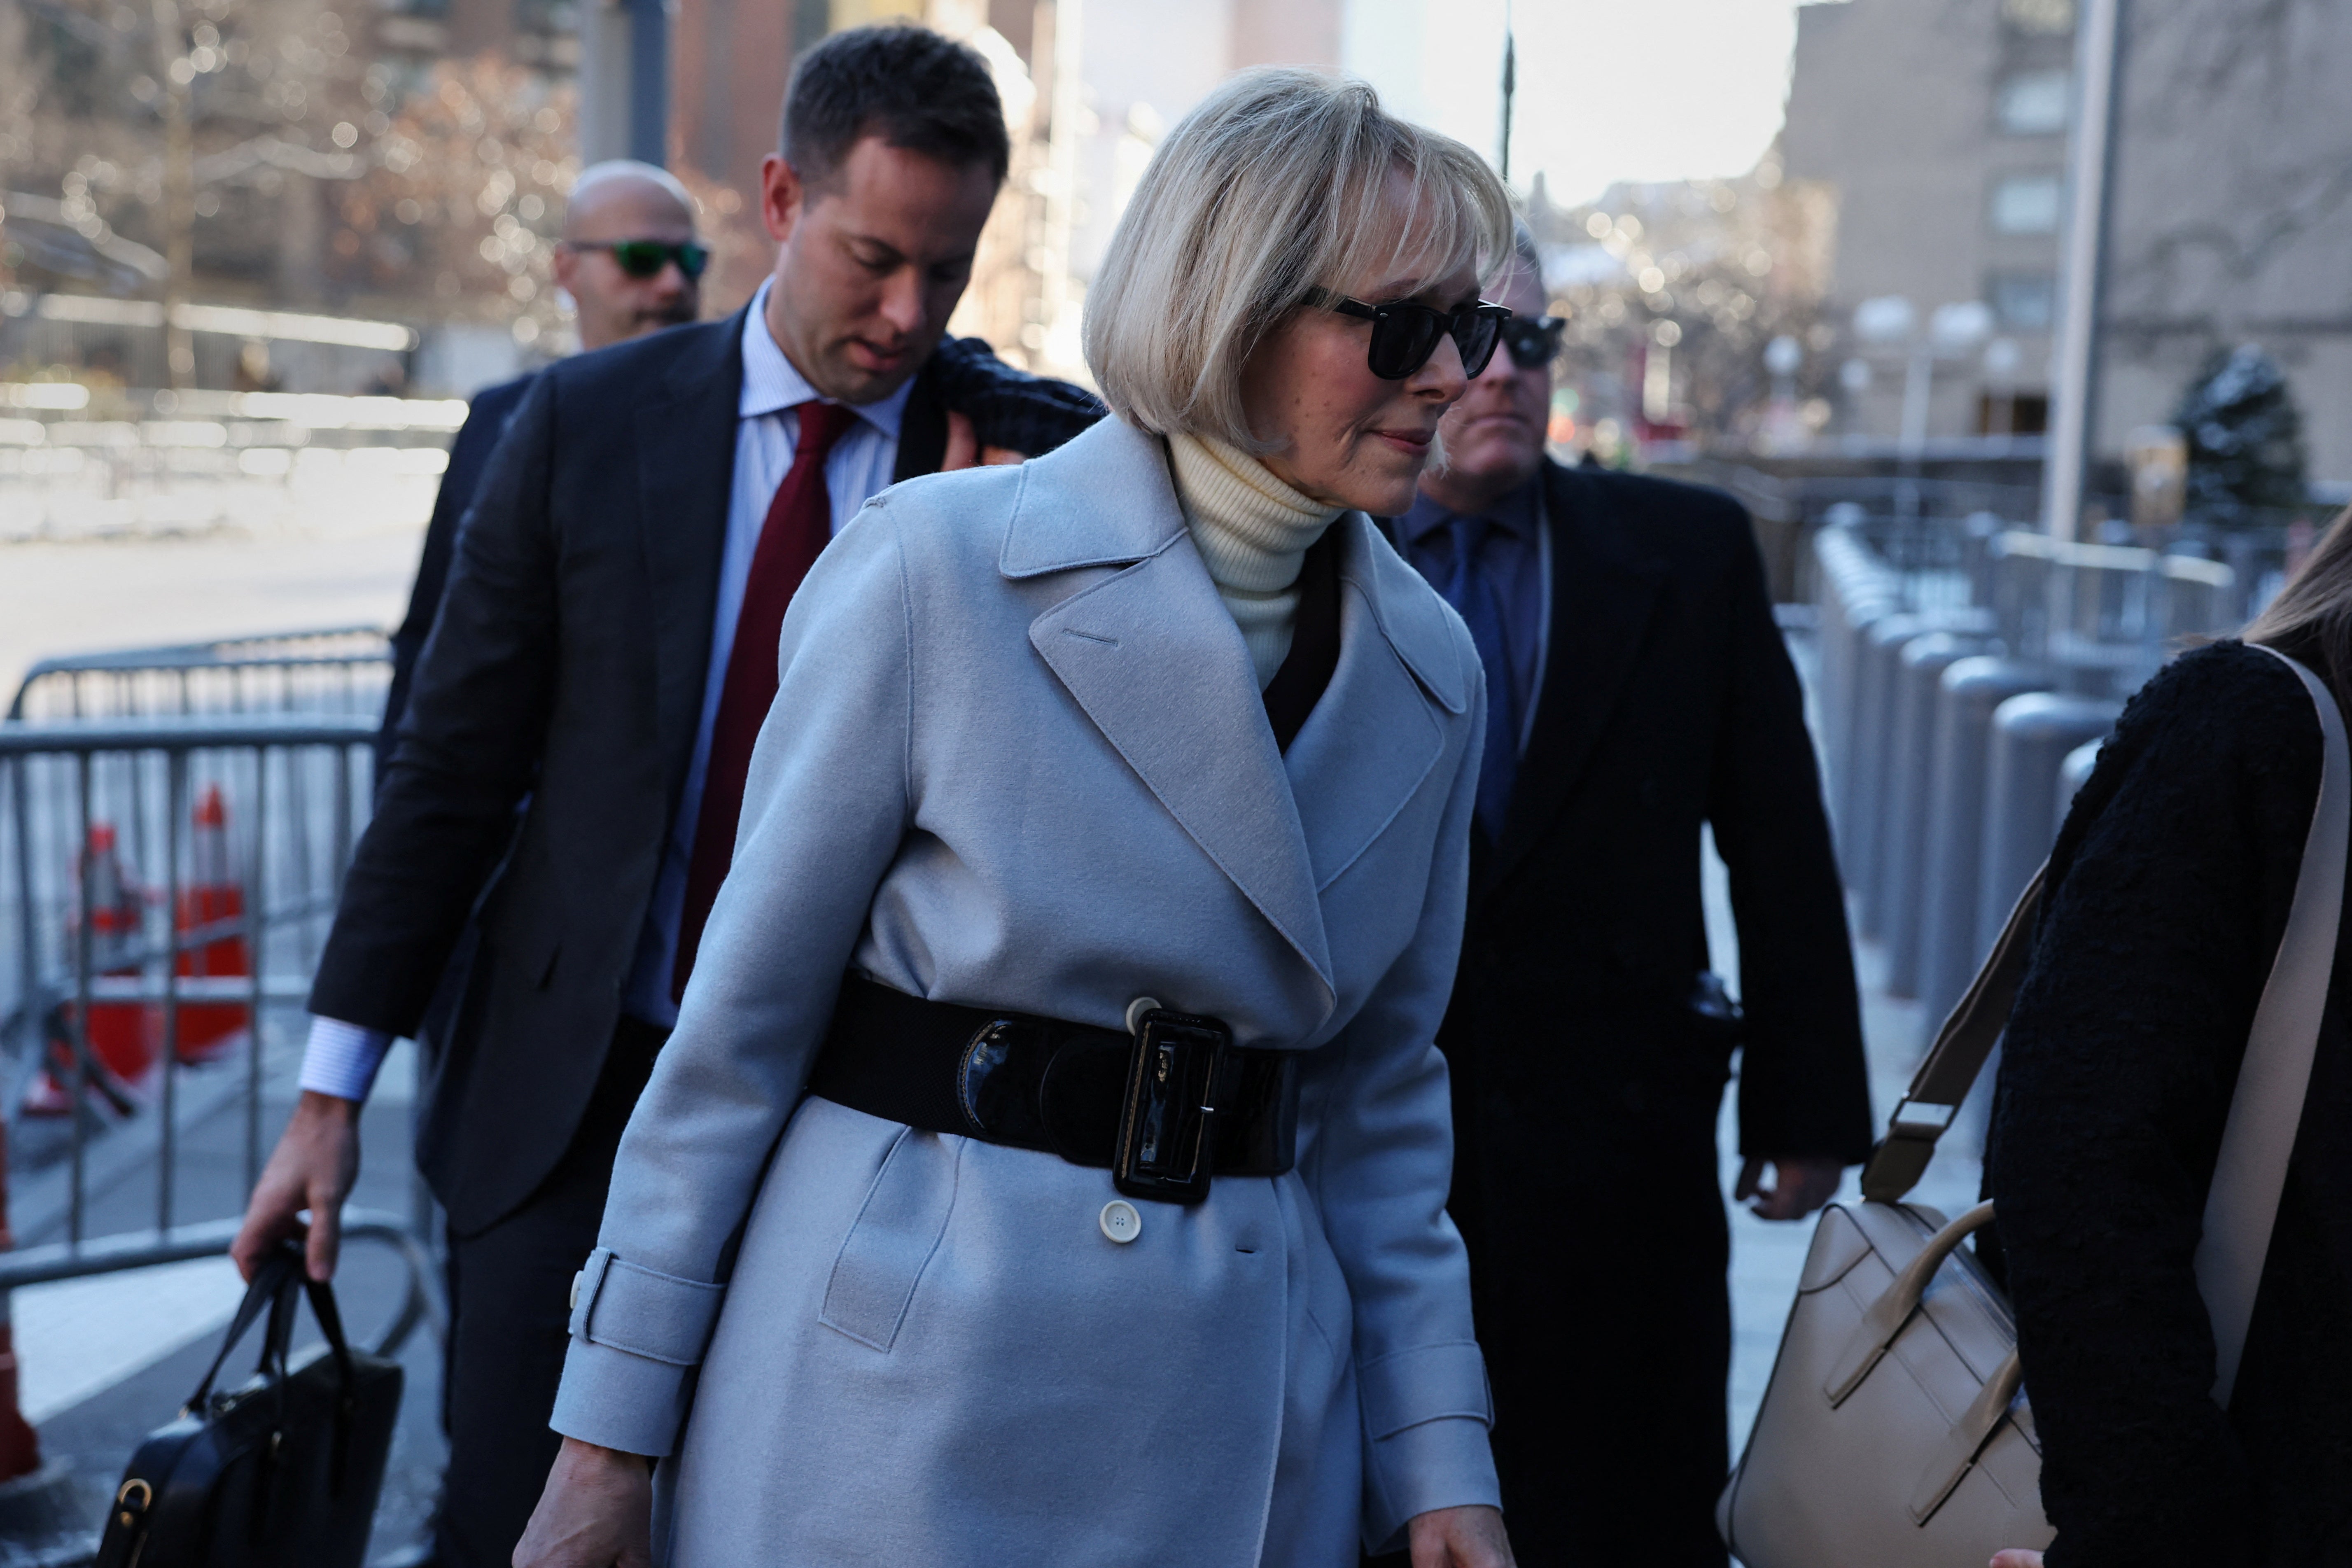 Carroll arrives at a Manhattan federal courthouse for the second day of a trial that will determine how much Donald Trump owes for defaming her